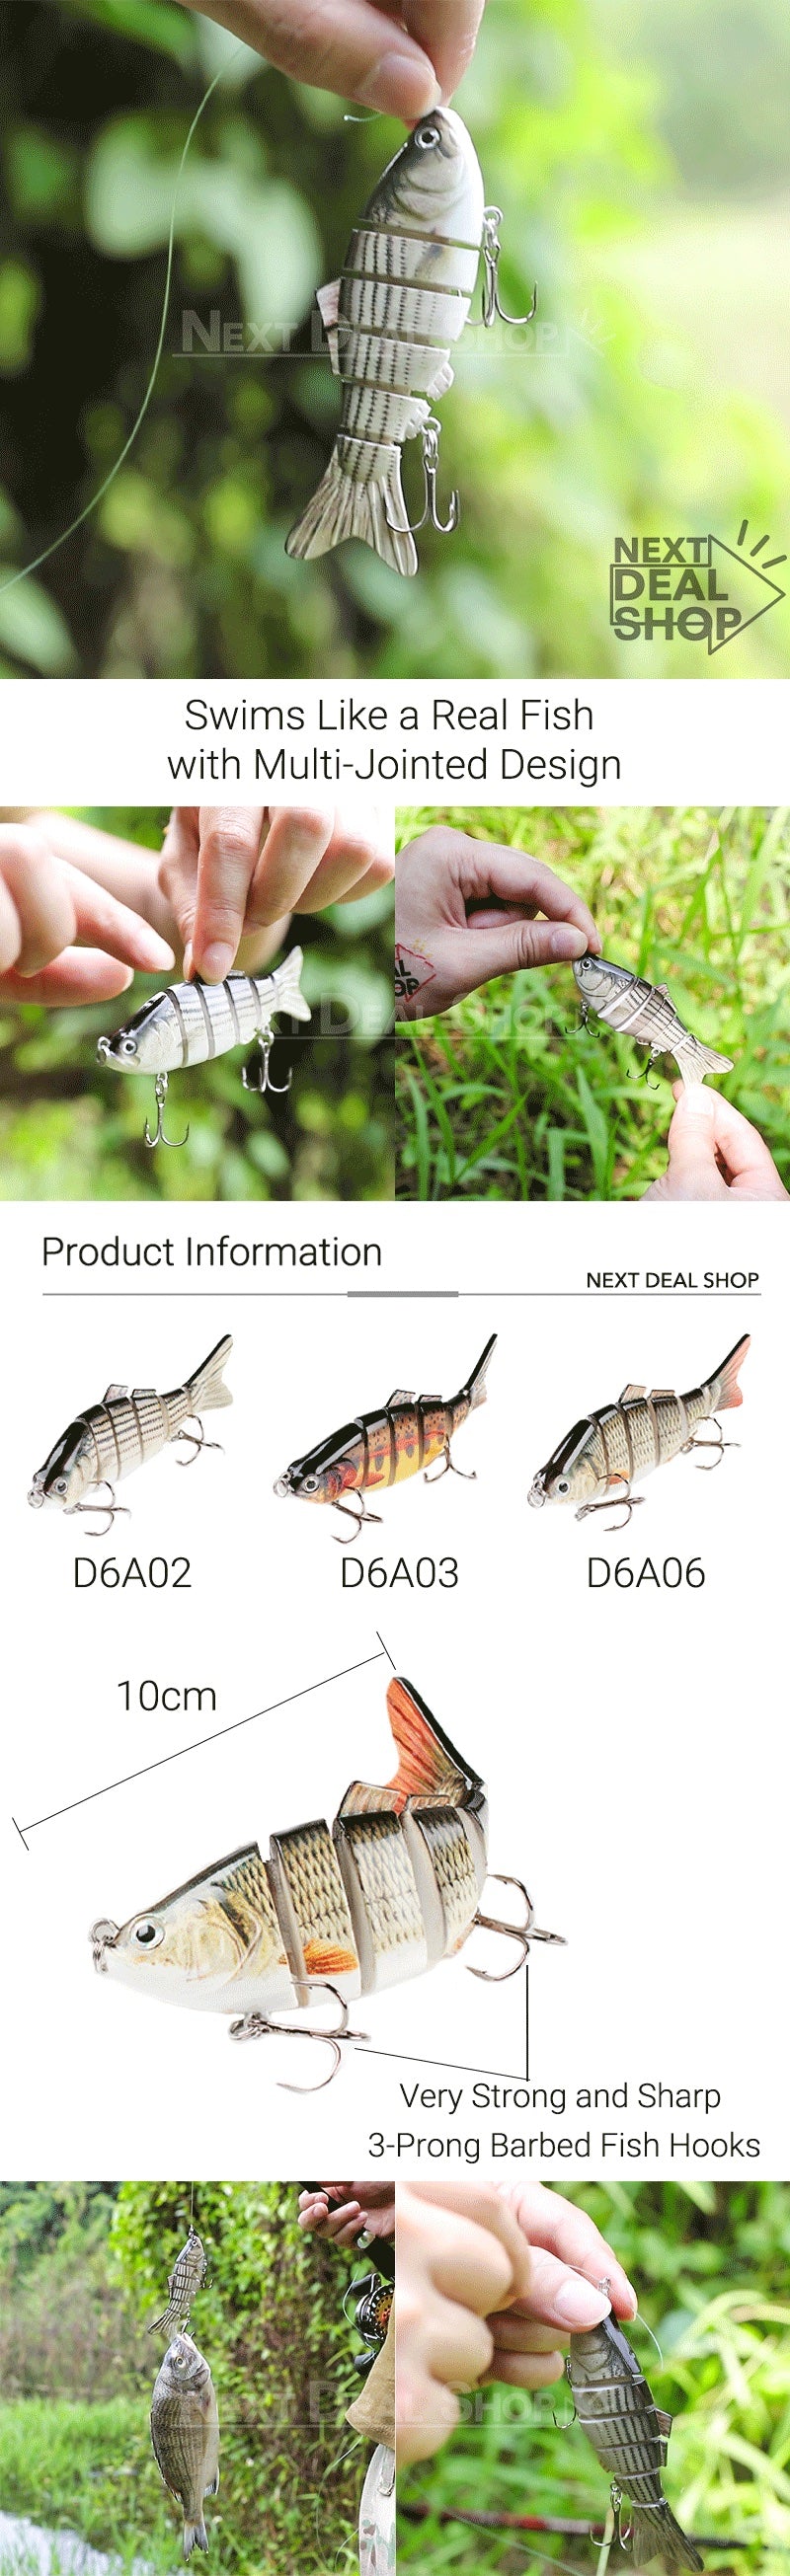 Multi Jointed Fishing Lure – Next Deal Shop EU